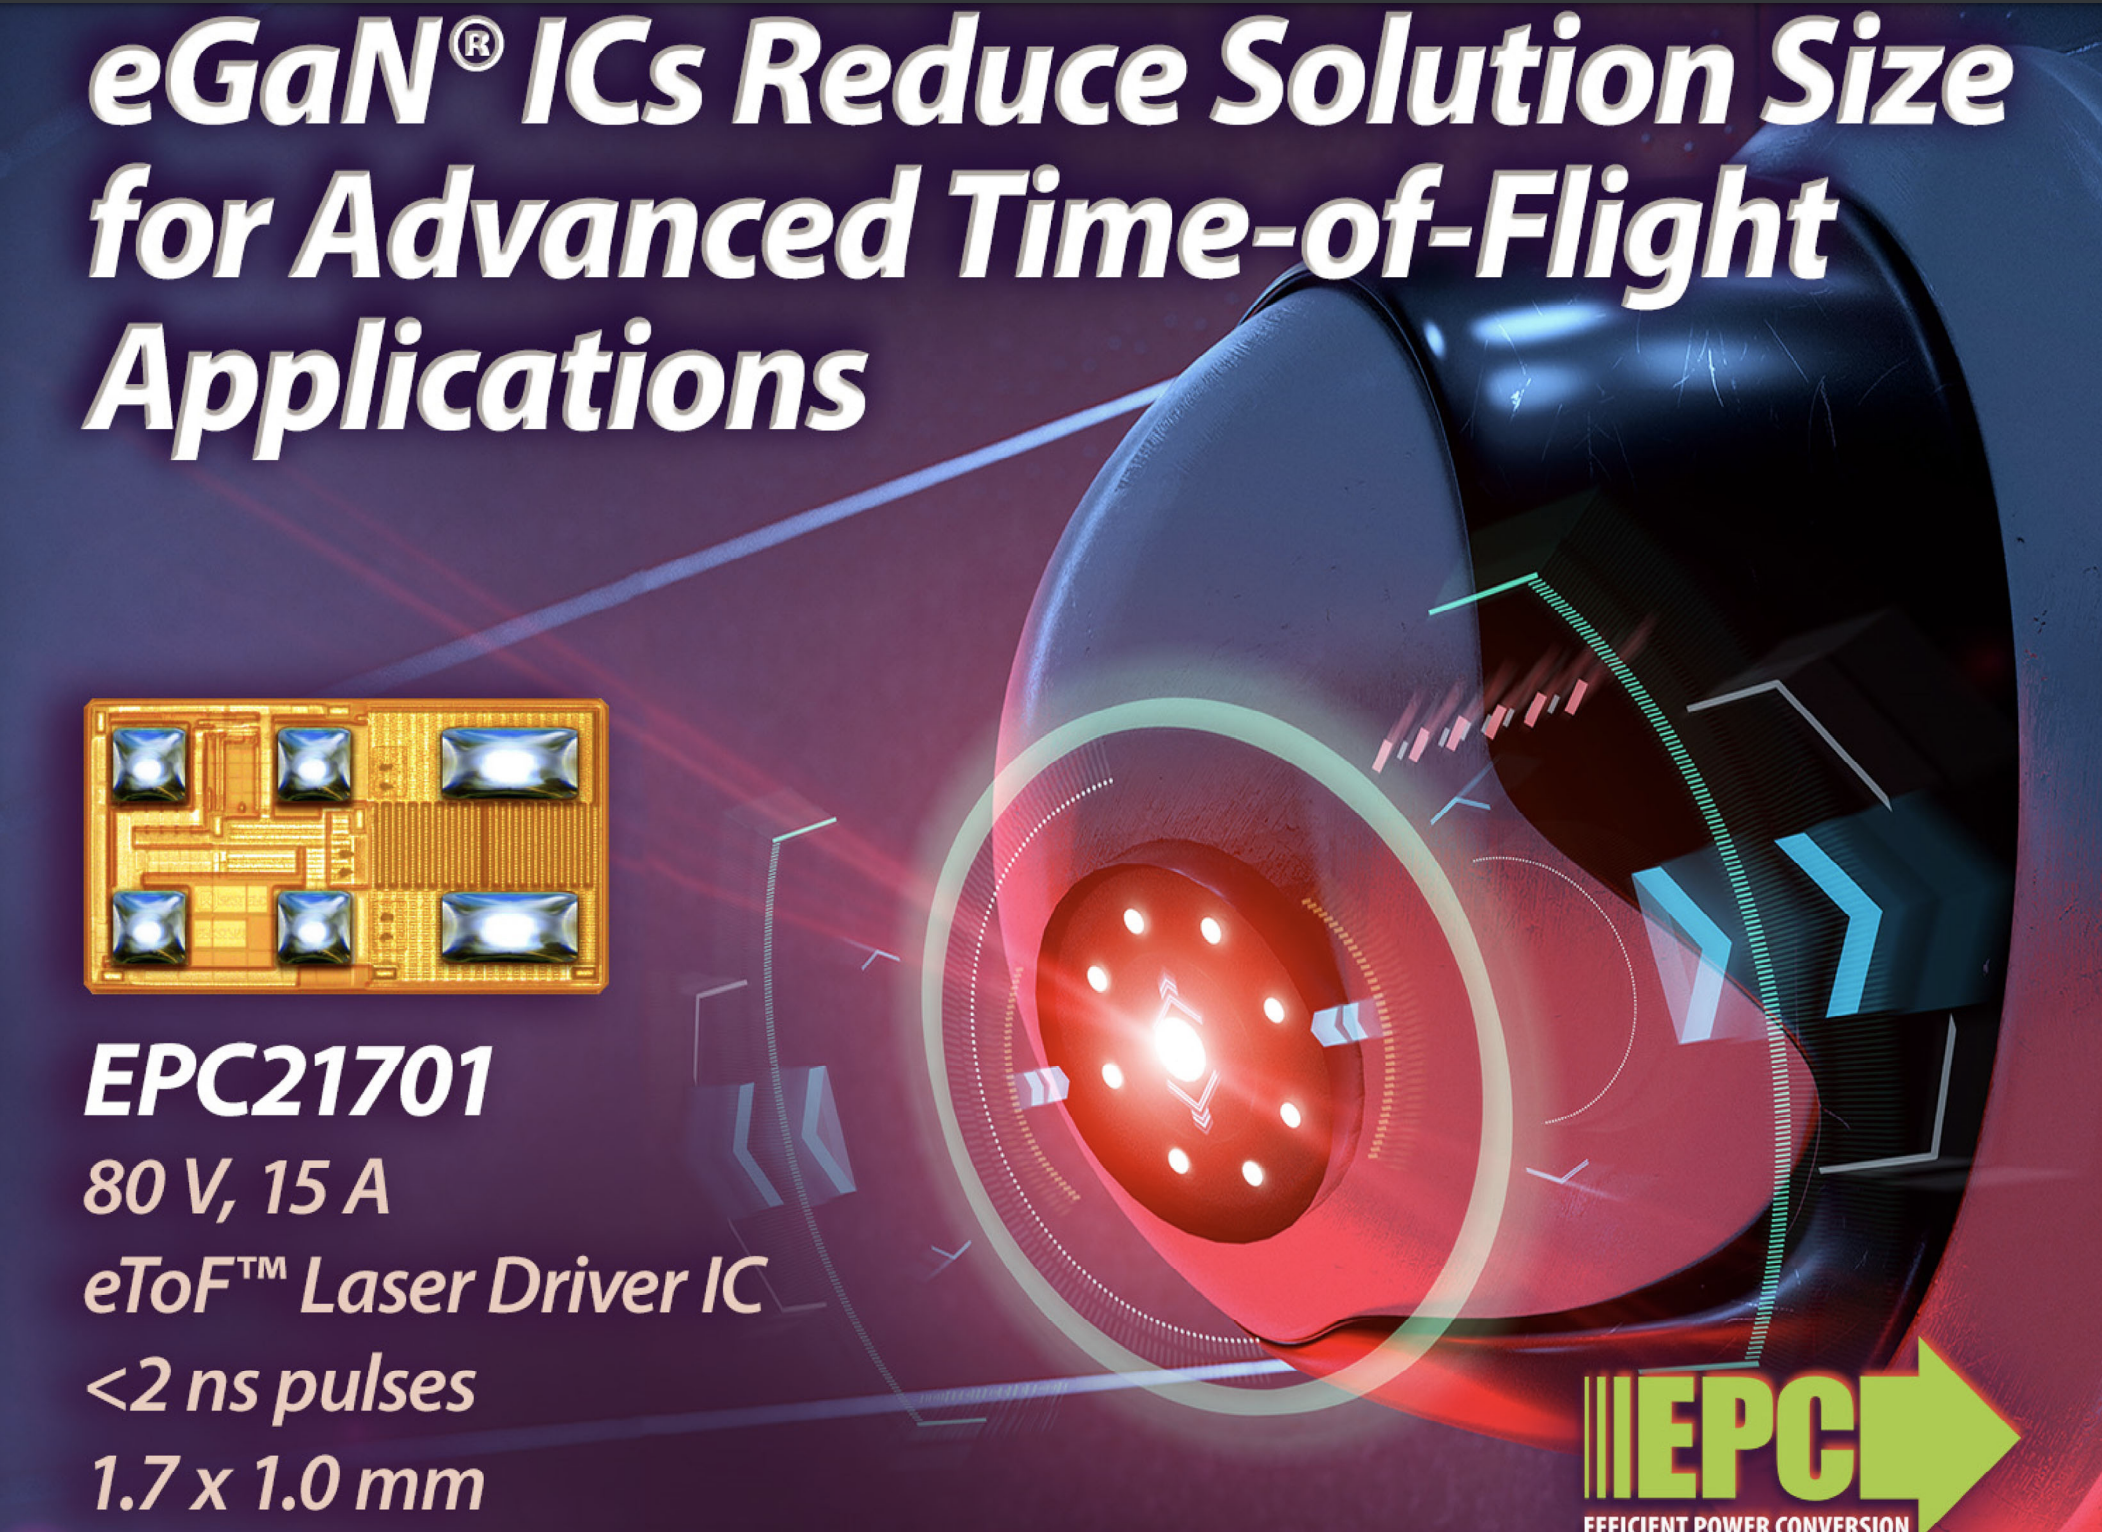 Design Higher Density and Lower Cost Lidar Systems with New 80 V, 15 A GaN eToF Laser Driver IC